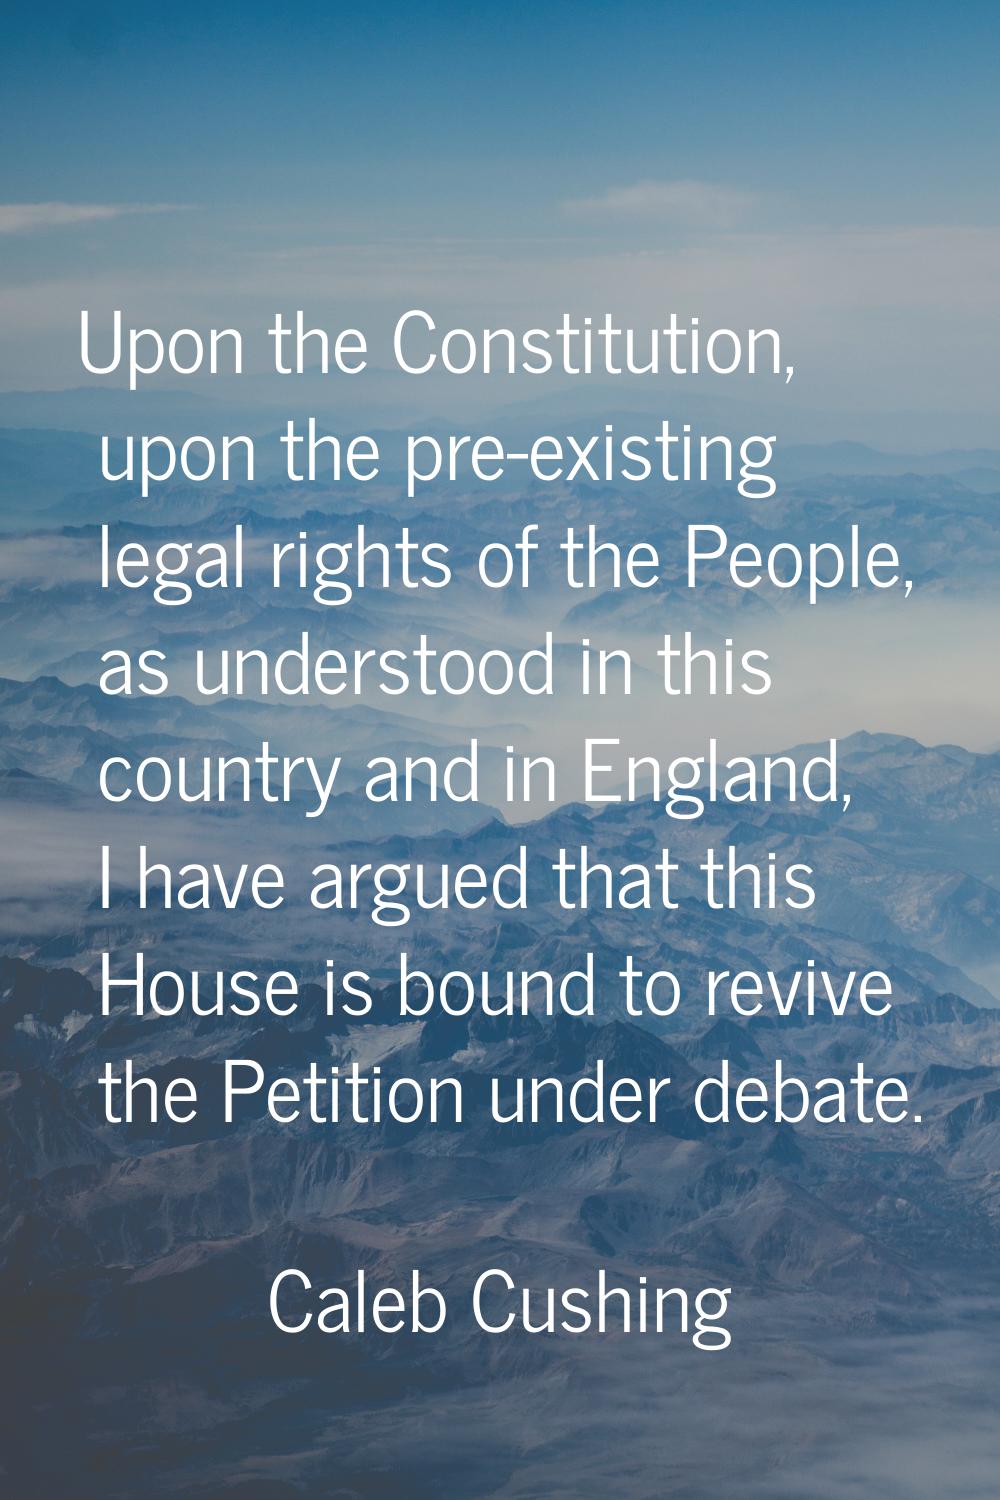 Upon the Constitution, upon the pre-existing legal rights of the People, as understood in this coun